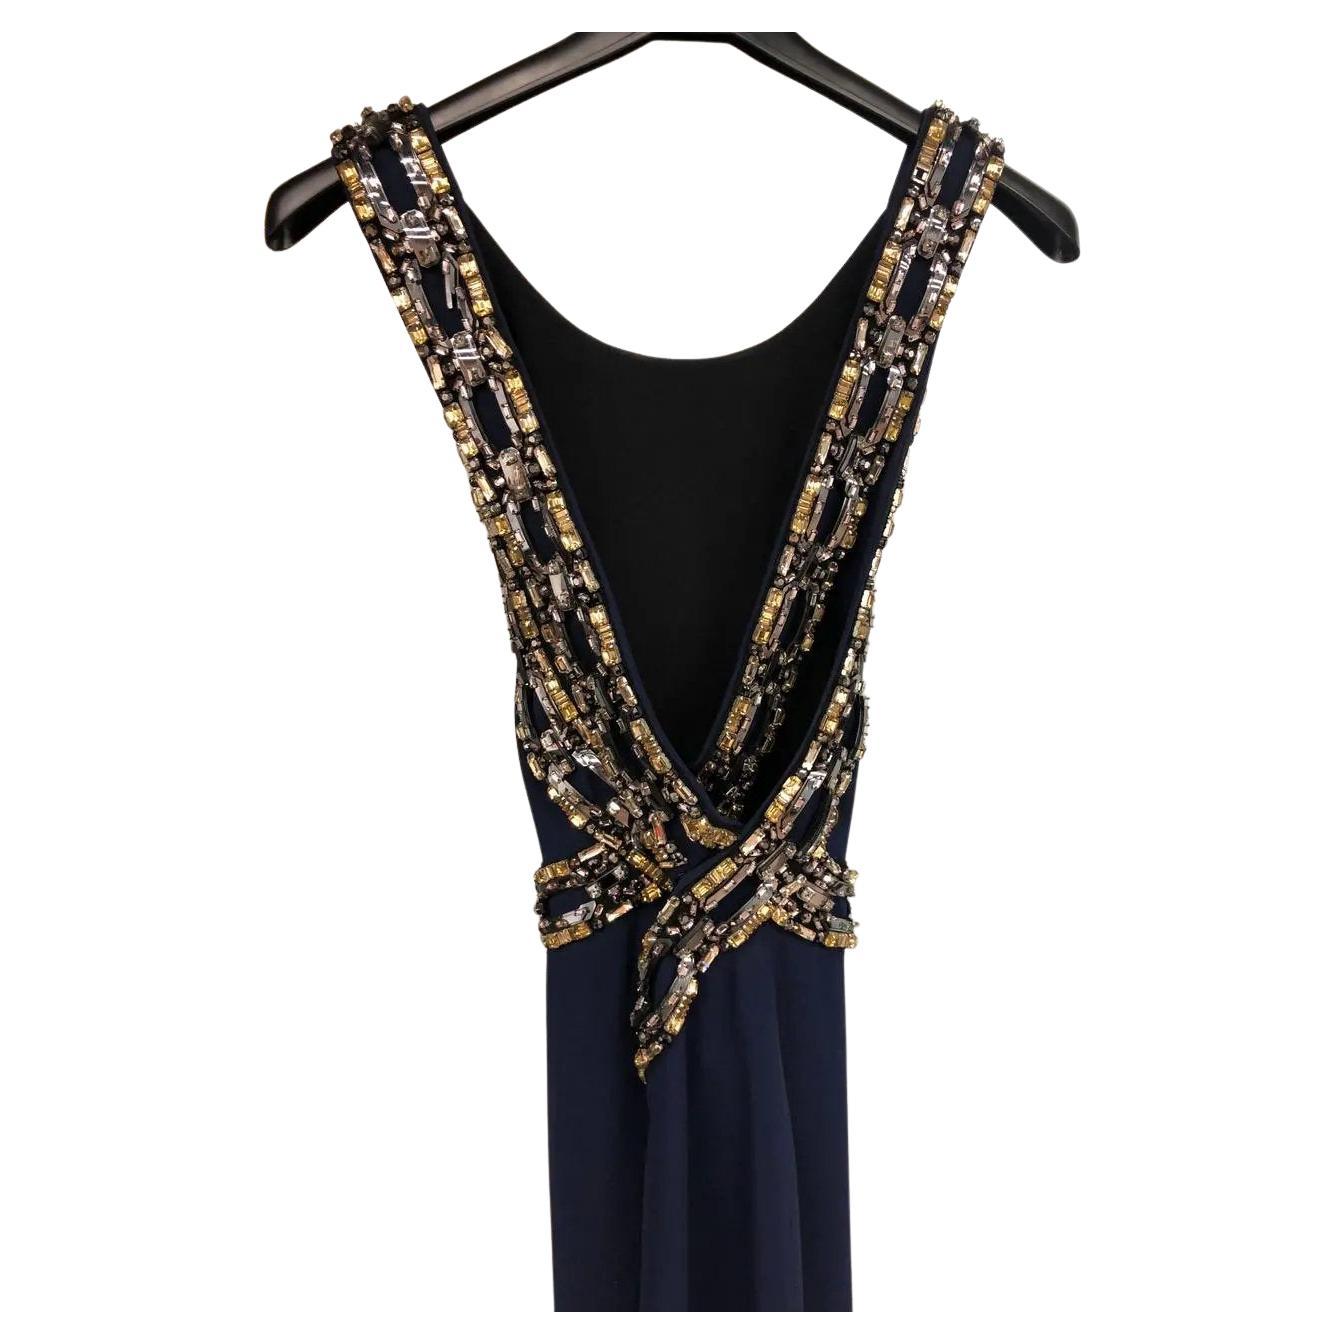 Gucci Crystal Embellished Navy Blue Gown 
Color: Navy blue
Size: IT - 40, US - 4
Made in Italy
Excellent condition